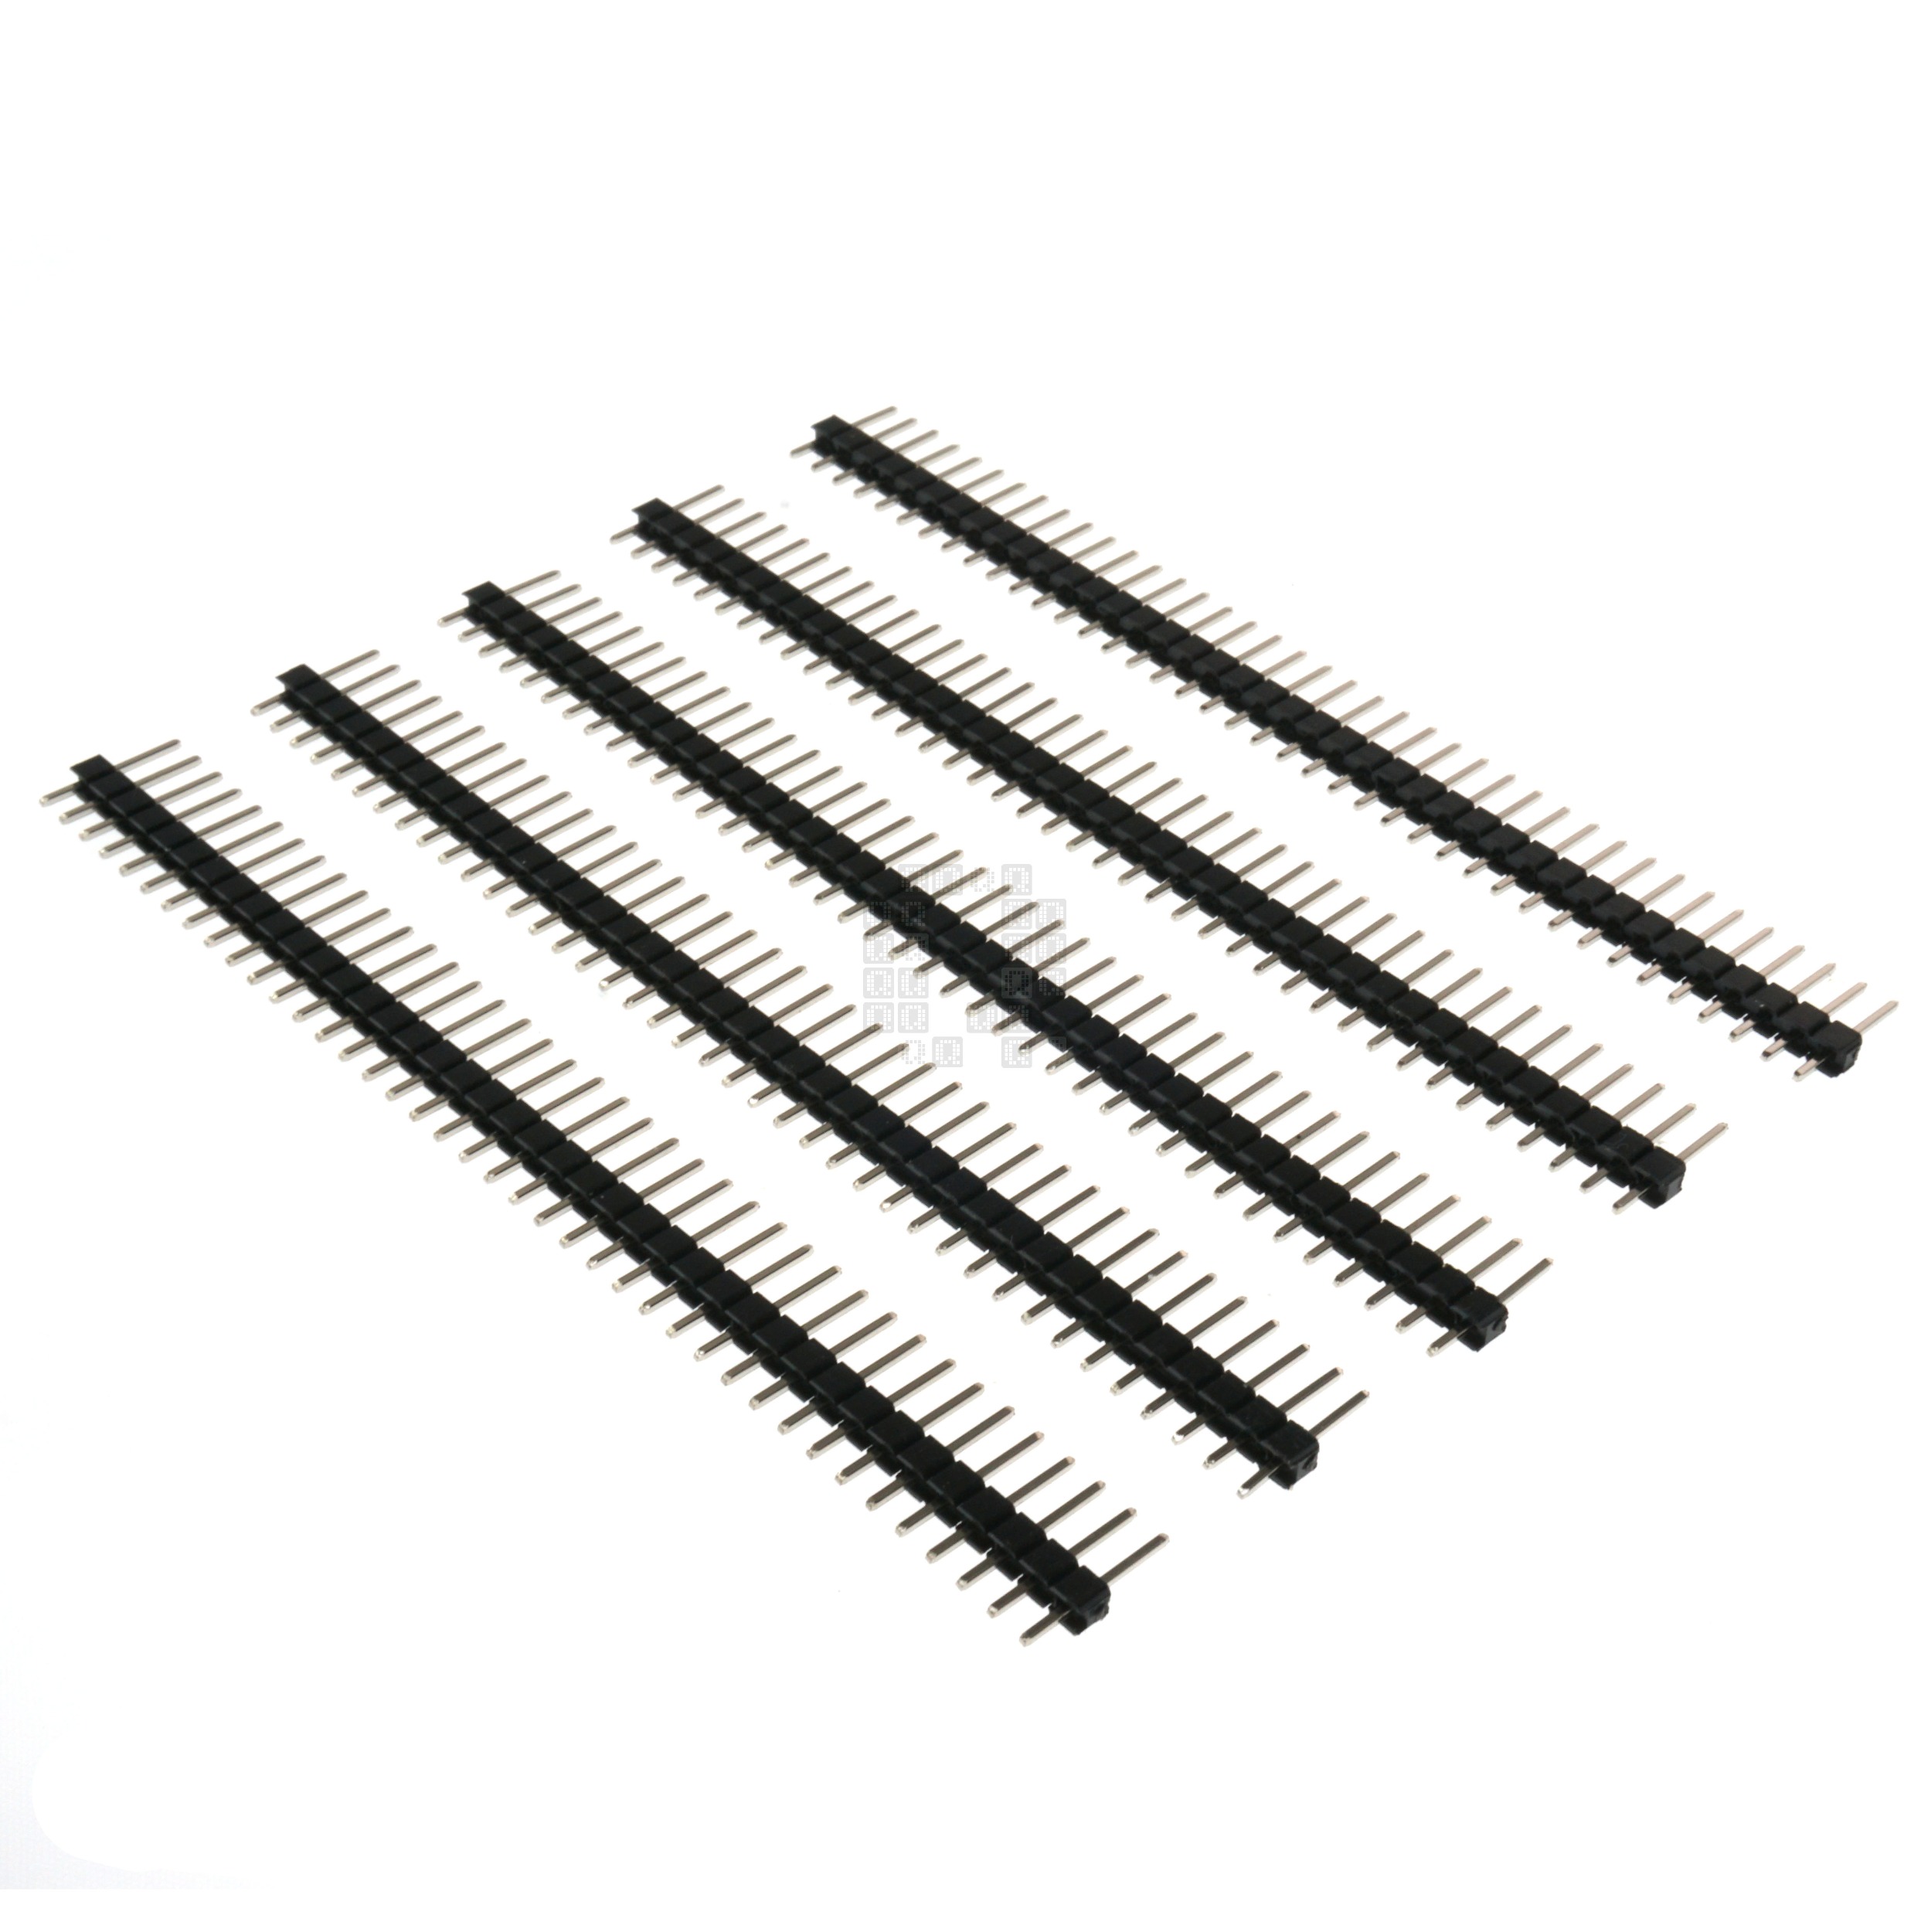 1x40 Pin Male Breakable Single Row Pin Header, 2.54mm Pitch, 11.2mm Height, 5-Pack, Black